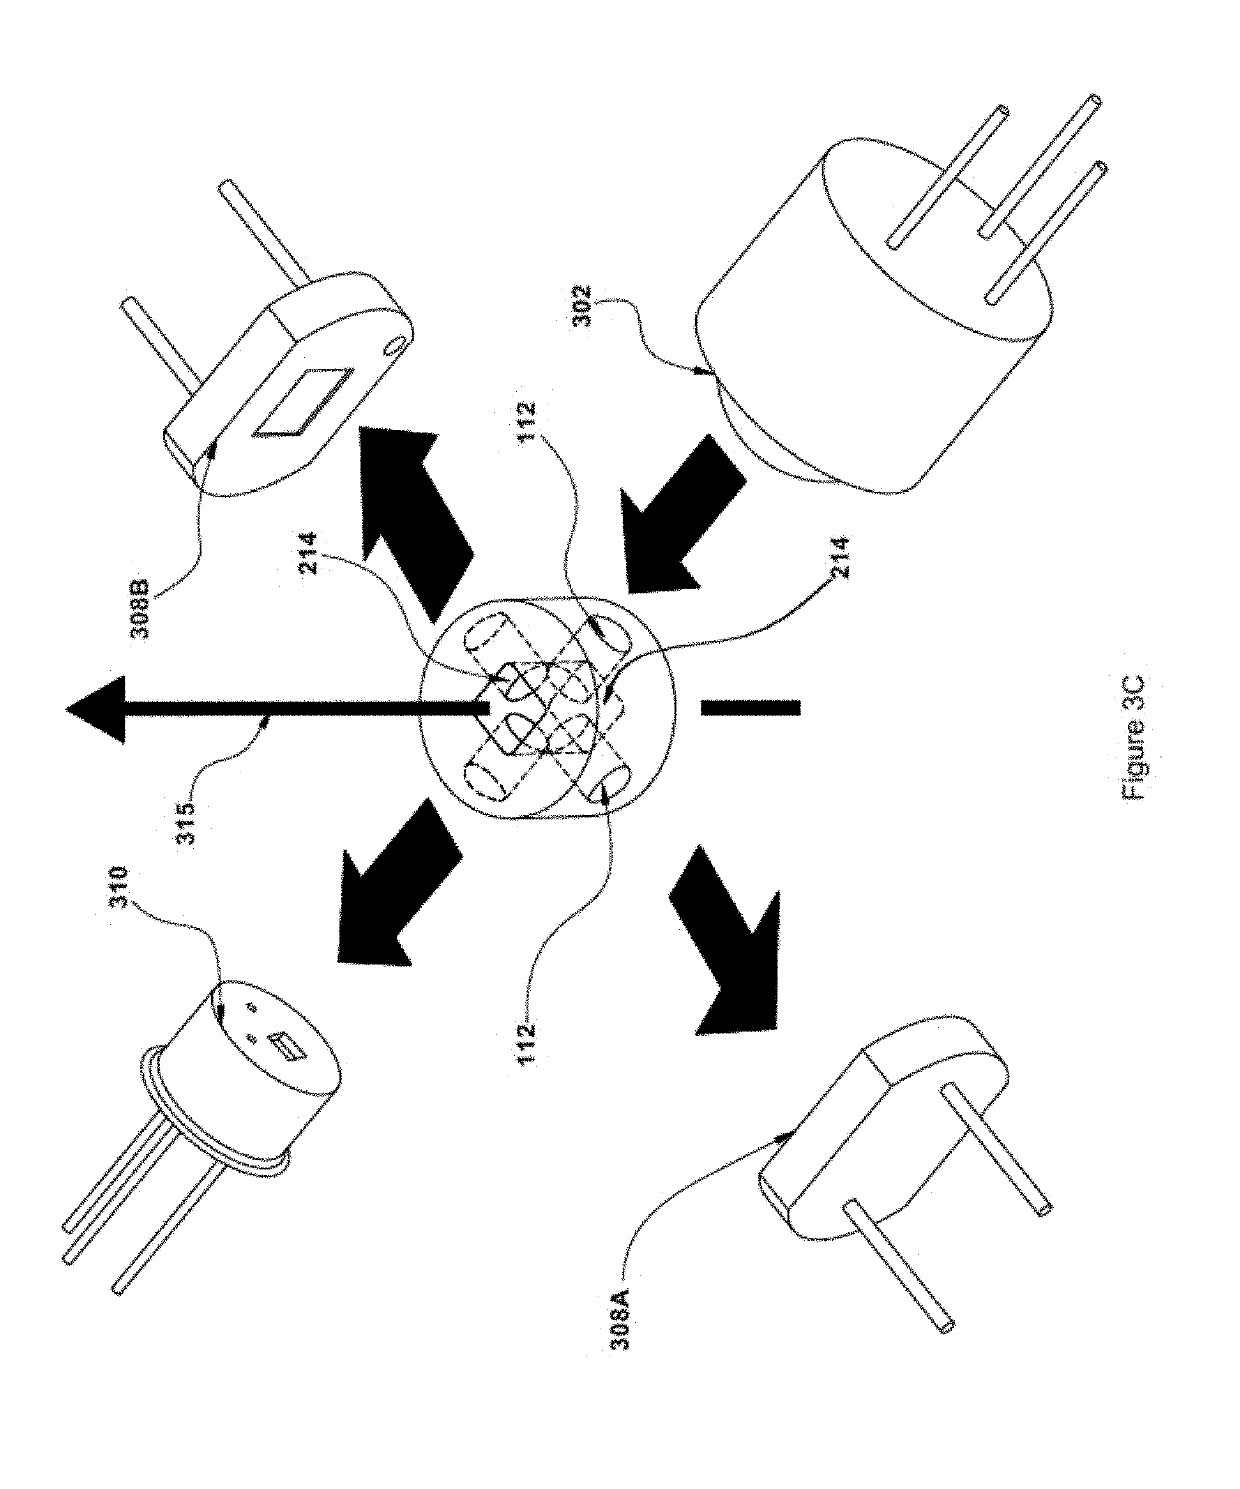 Medical device location and tracking system